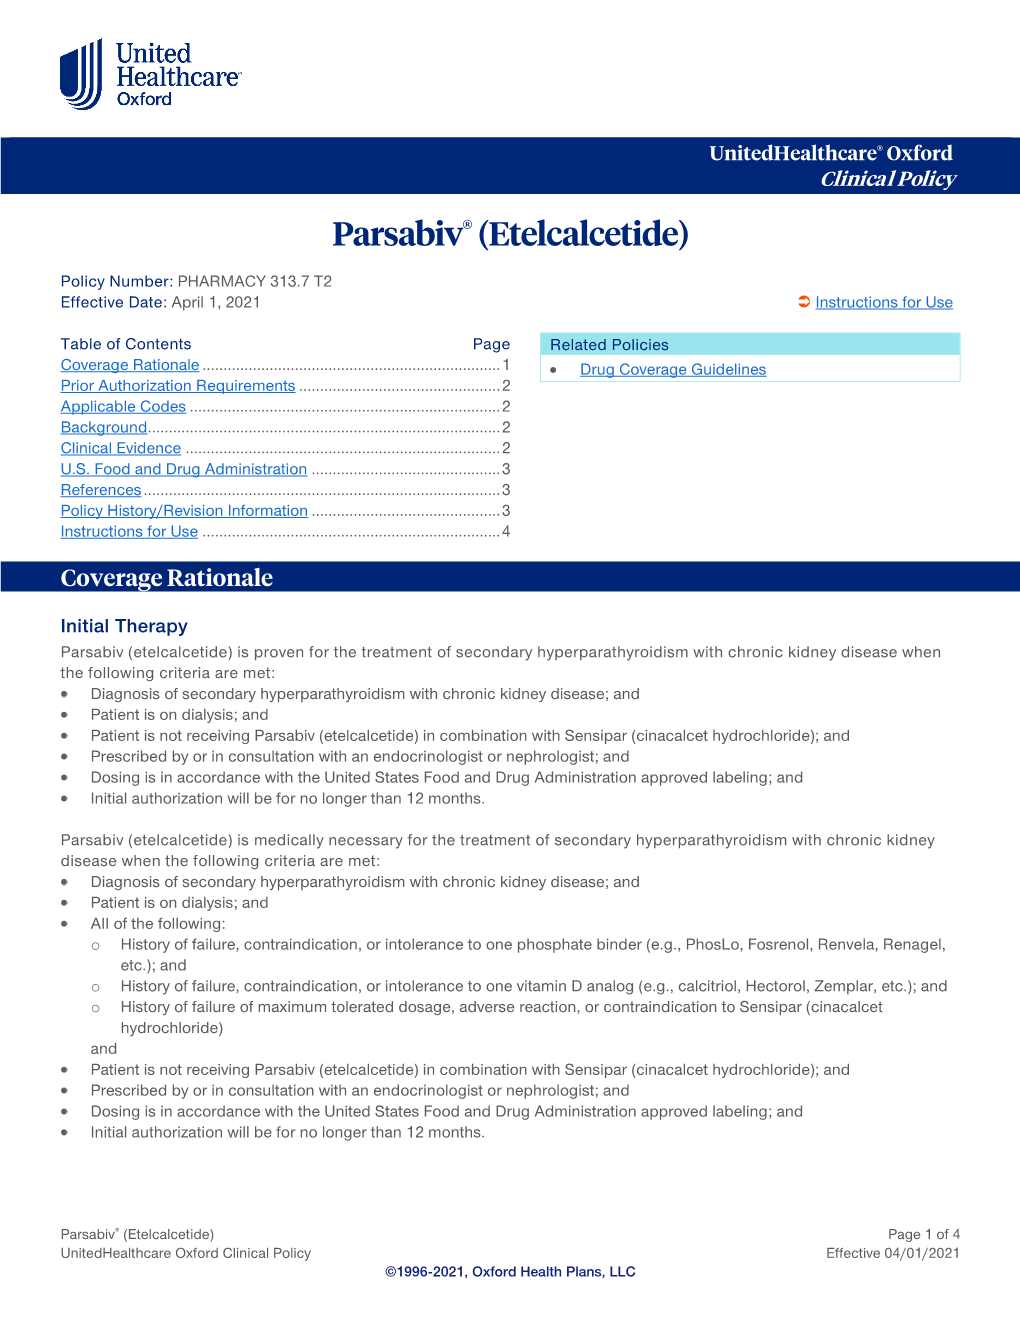 Parsabiv® (Etelcalcetide) – Oxford Clinical Policy